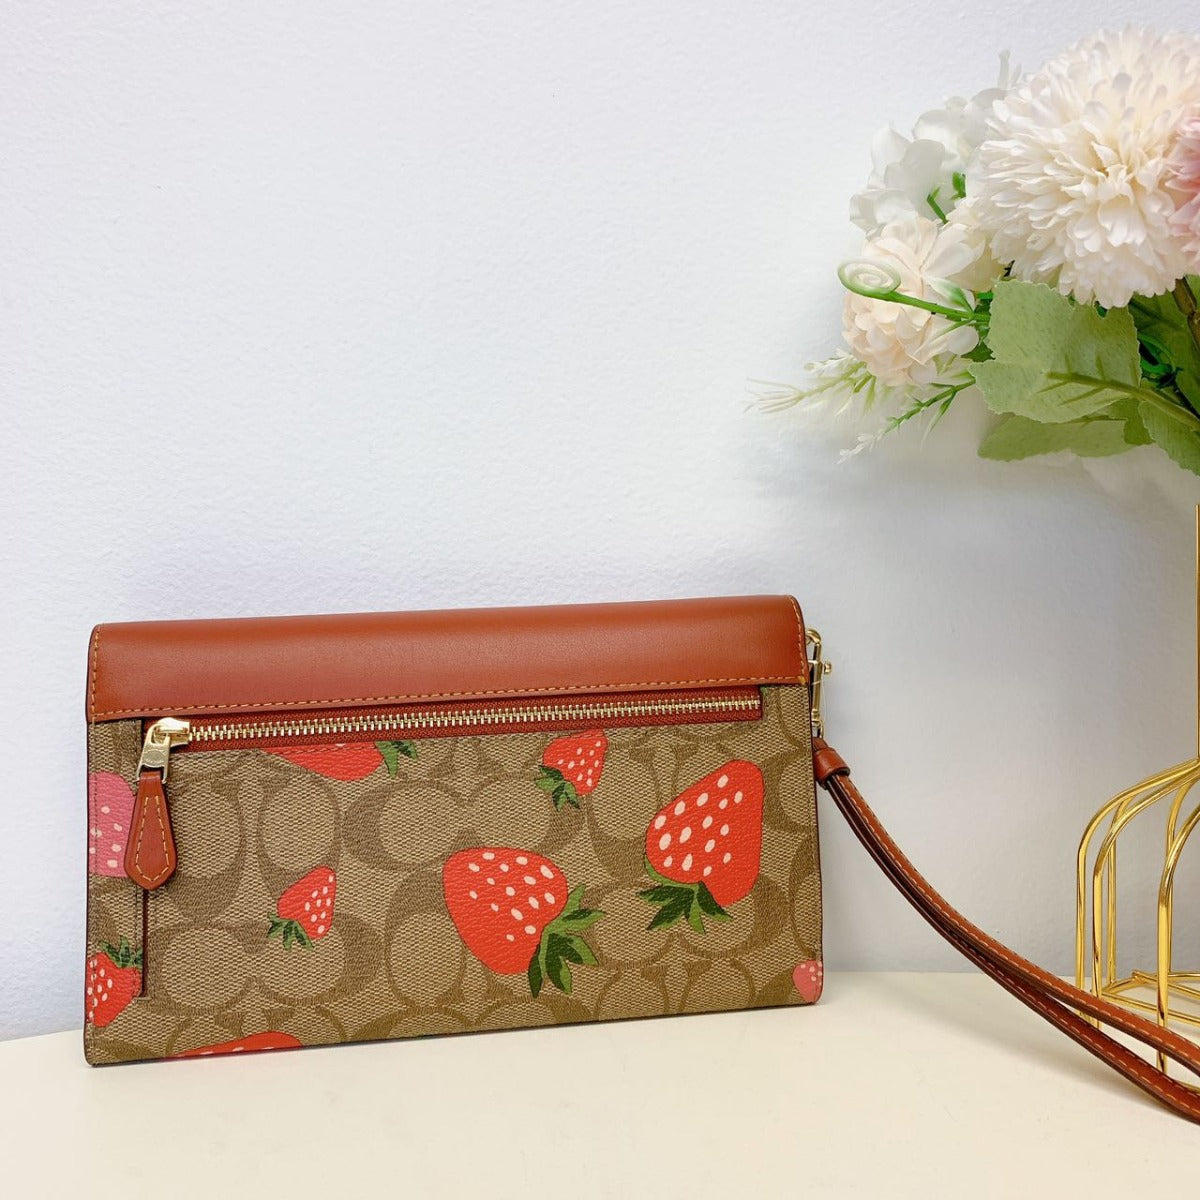 Coach CH524 Travel Envelope Wallet In Signature Canvas With Wild Strawberry Print IN Khaki Multi